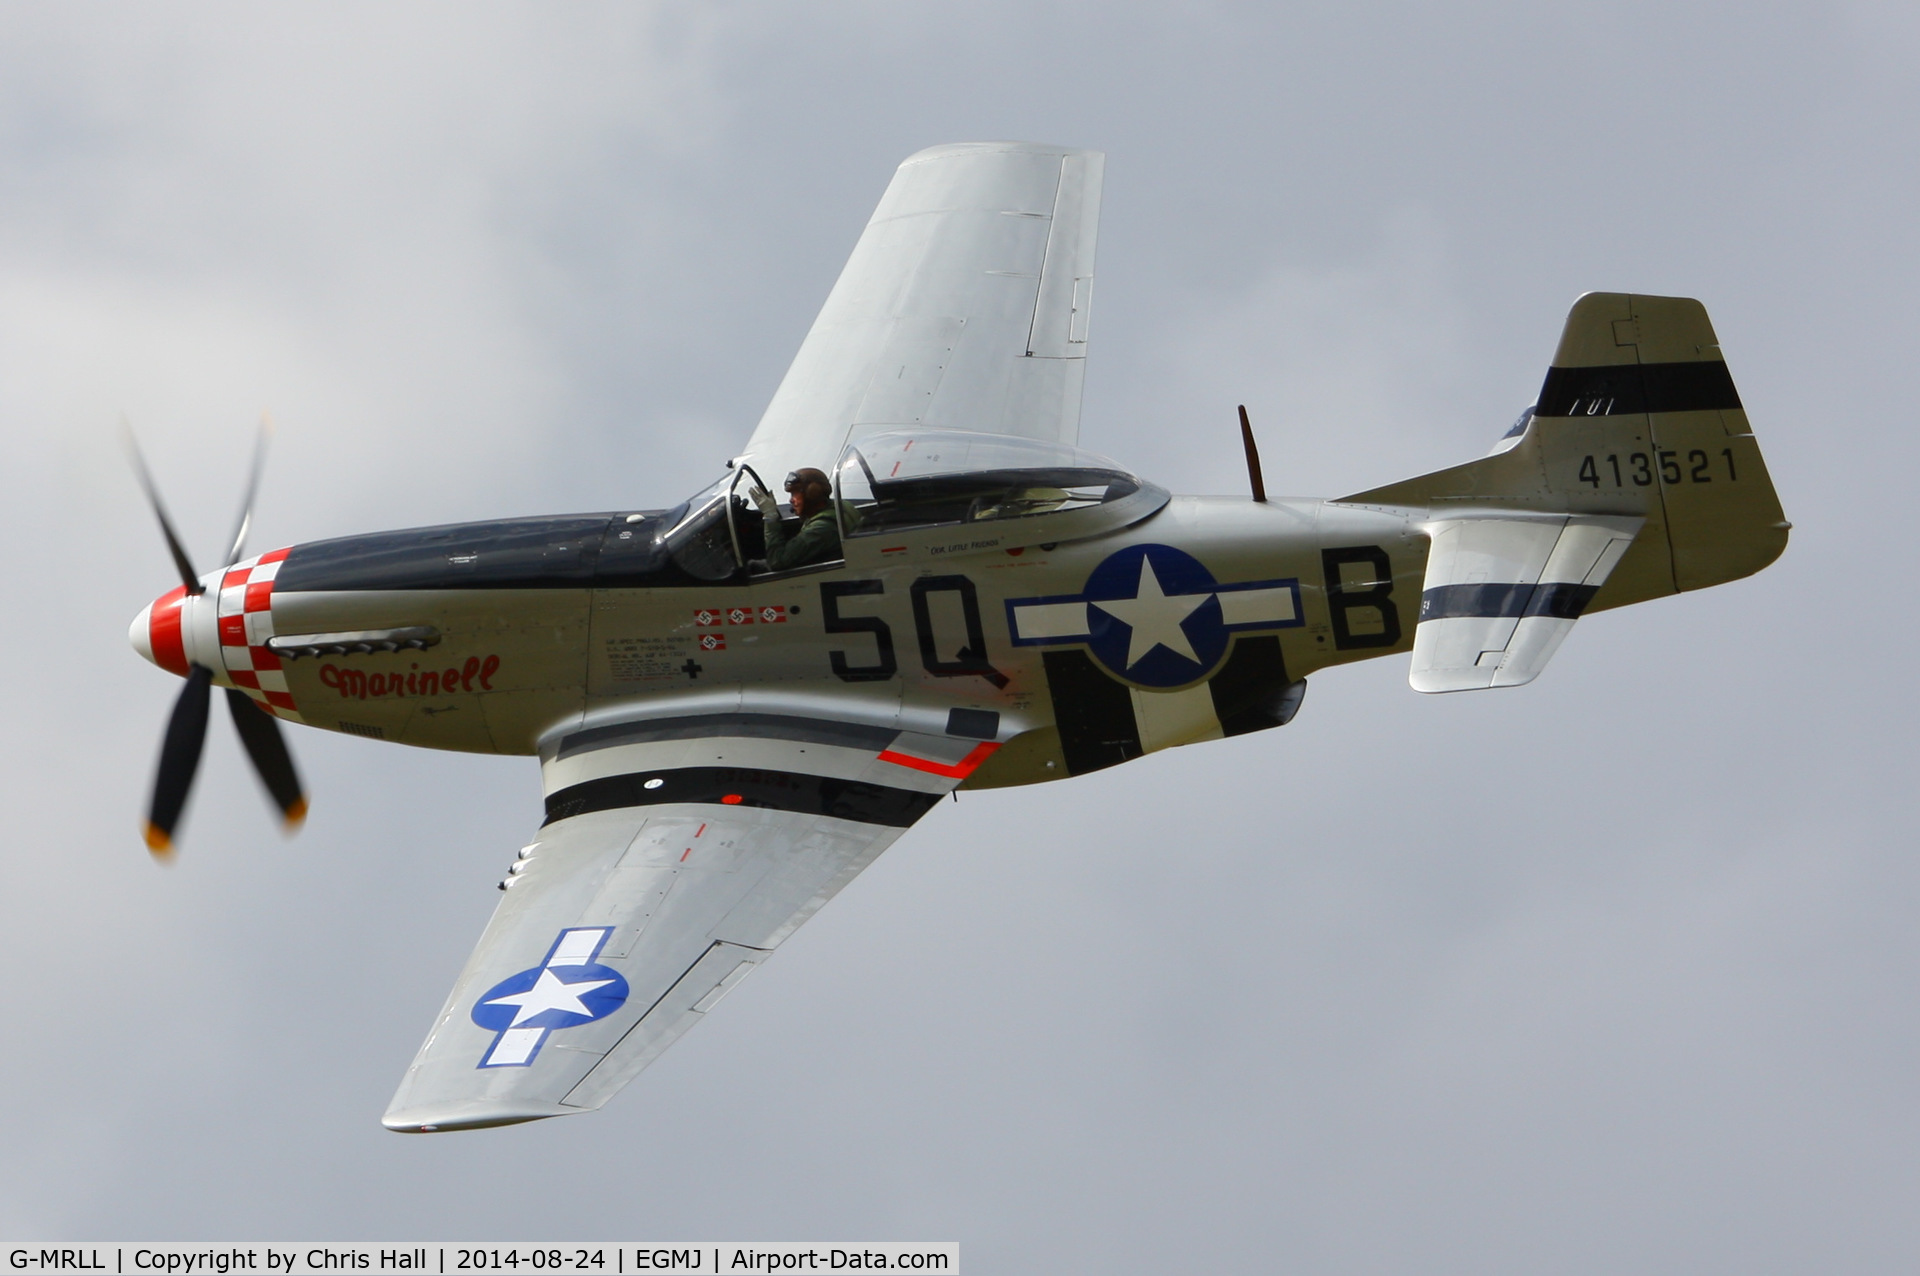 G-MRLL, 1943 North American P-51D Mustang C/N 109-27154, at the Little Gransden Airshow 2014